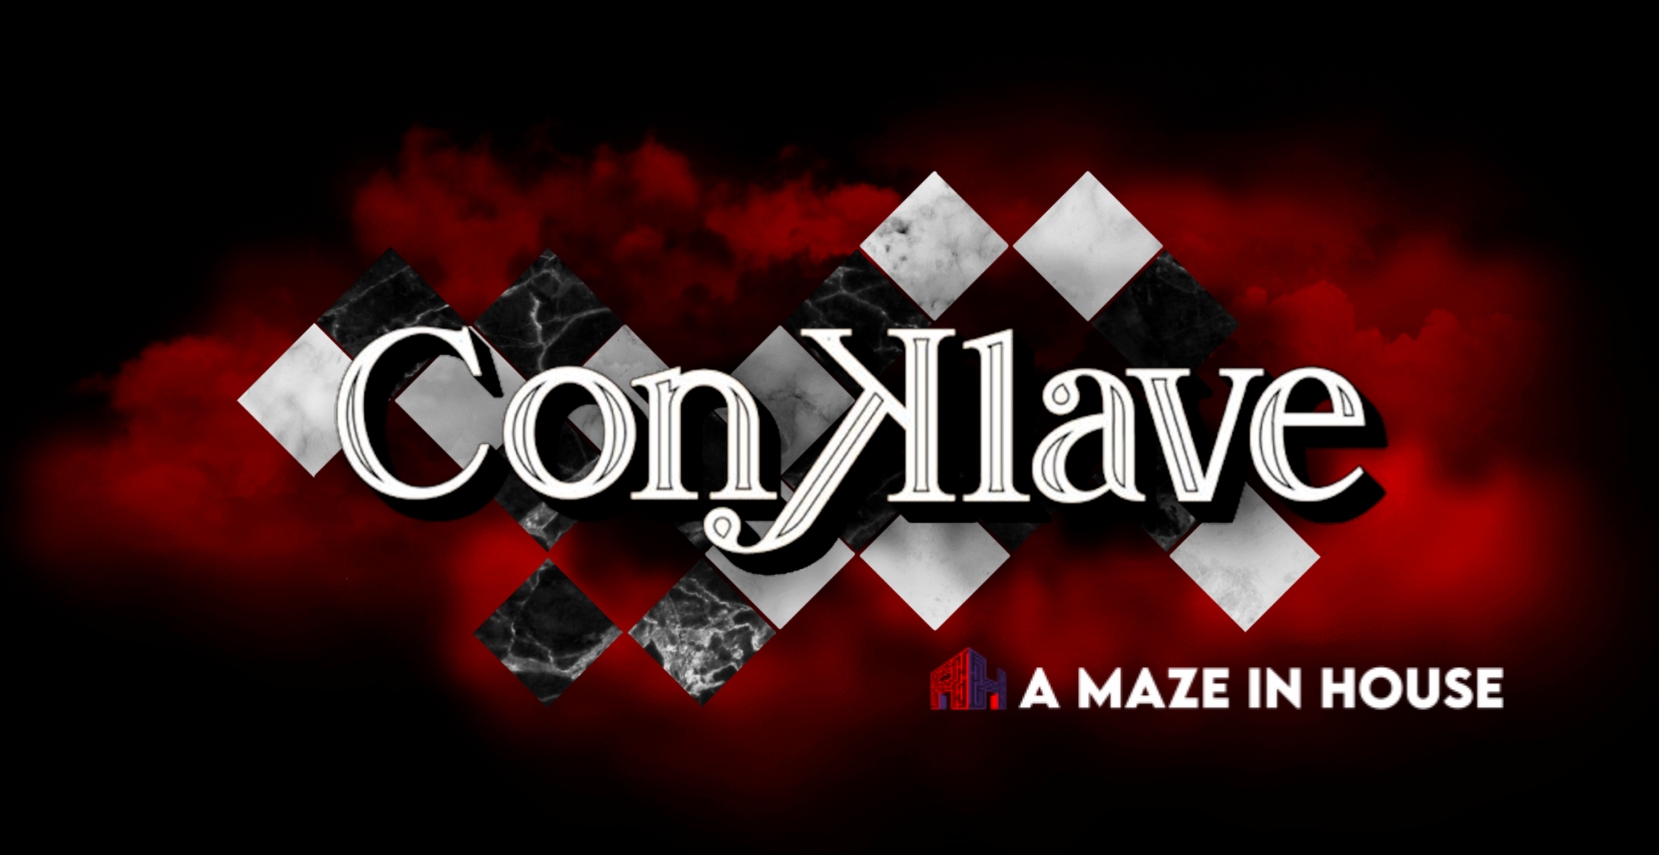 Conklave - A Maze in House (Madrid) - Review Escape Room